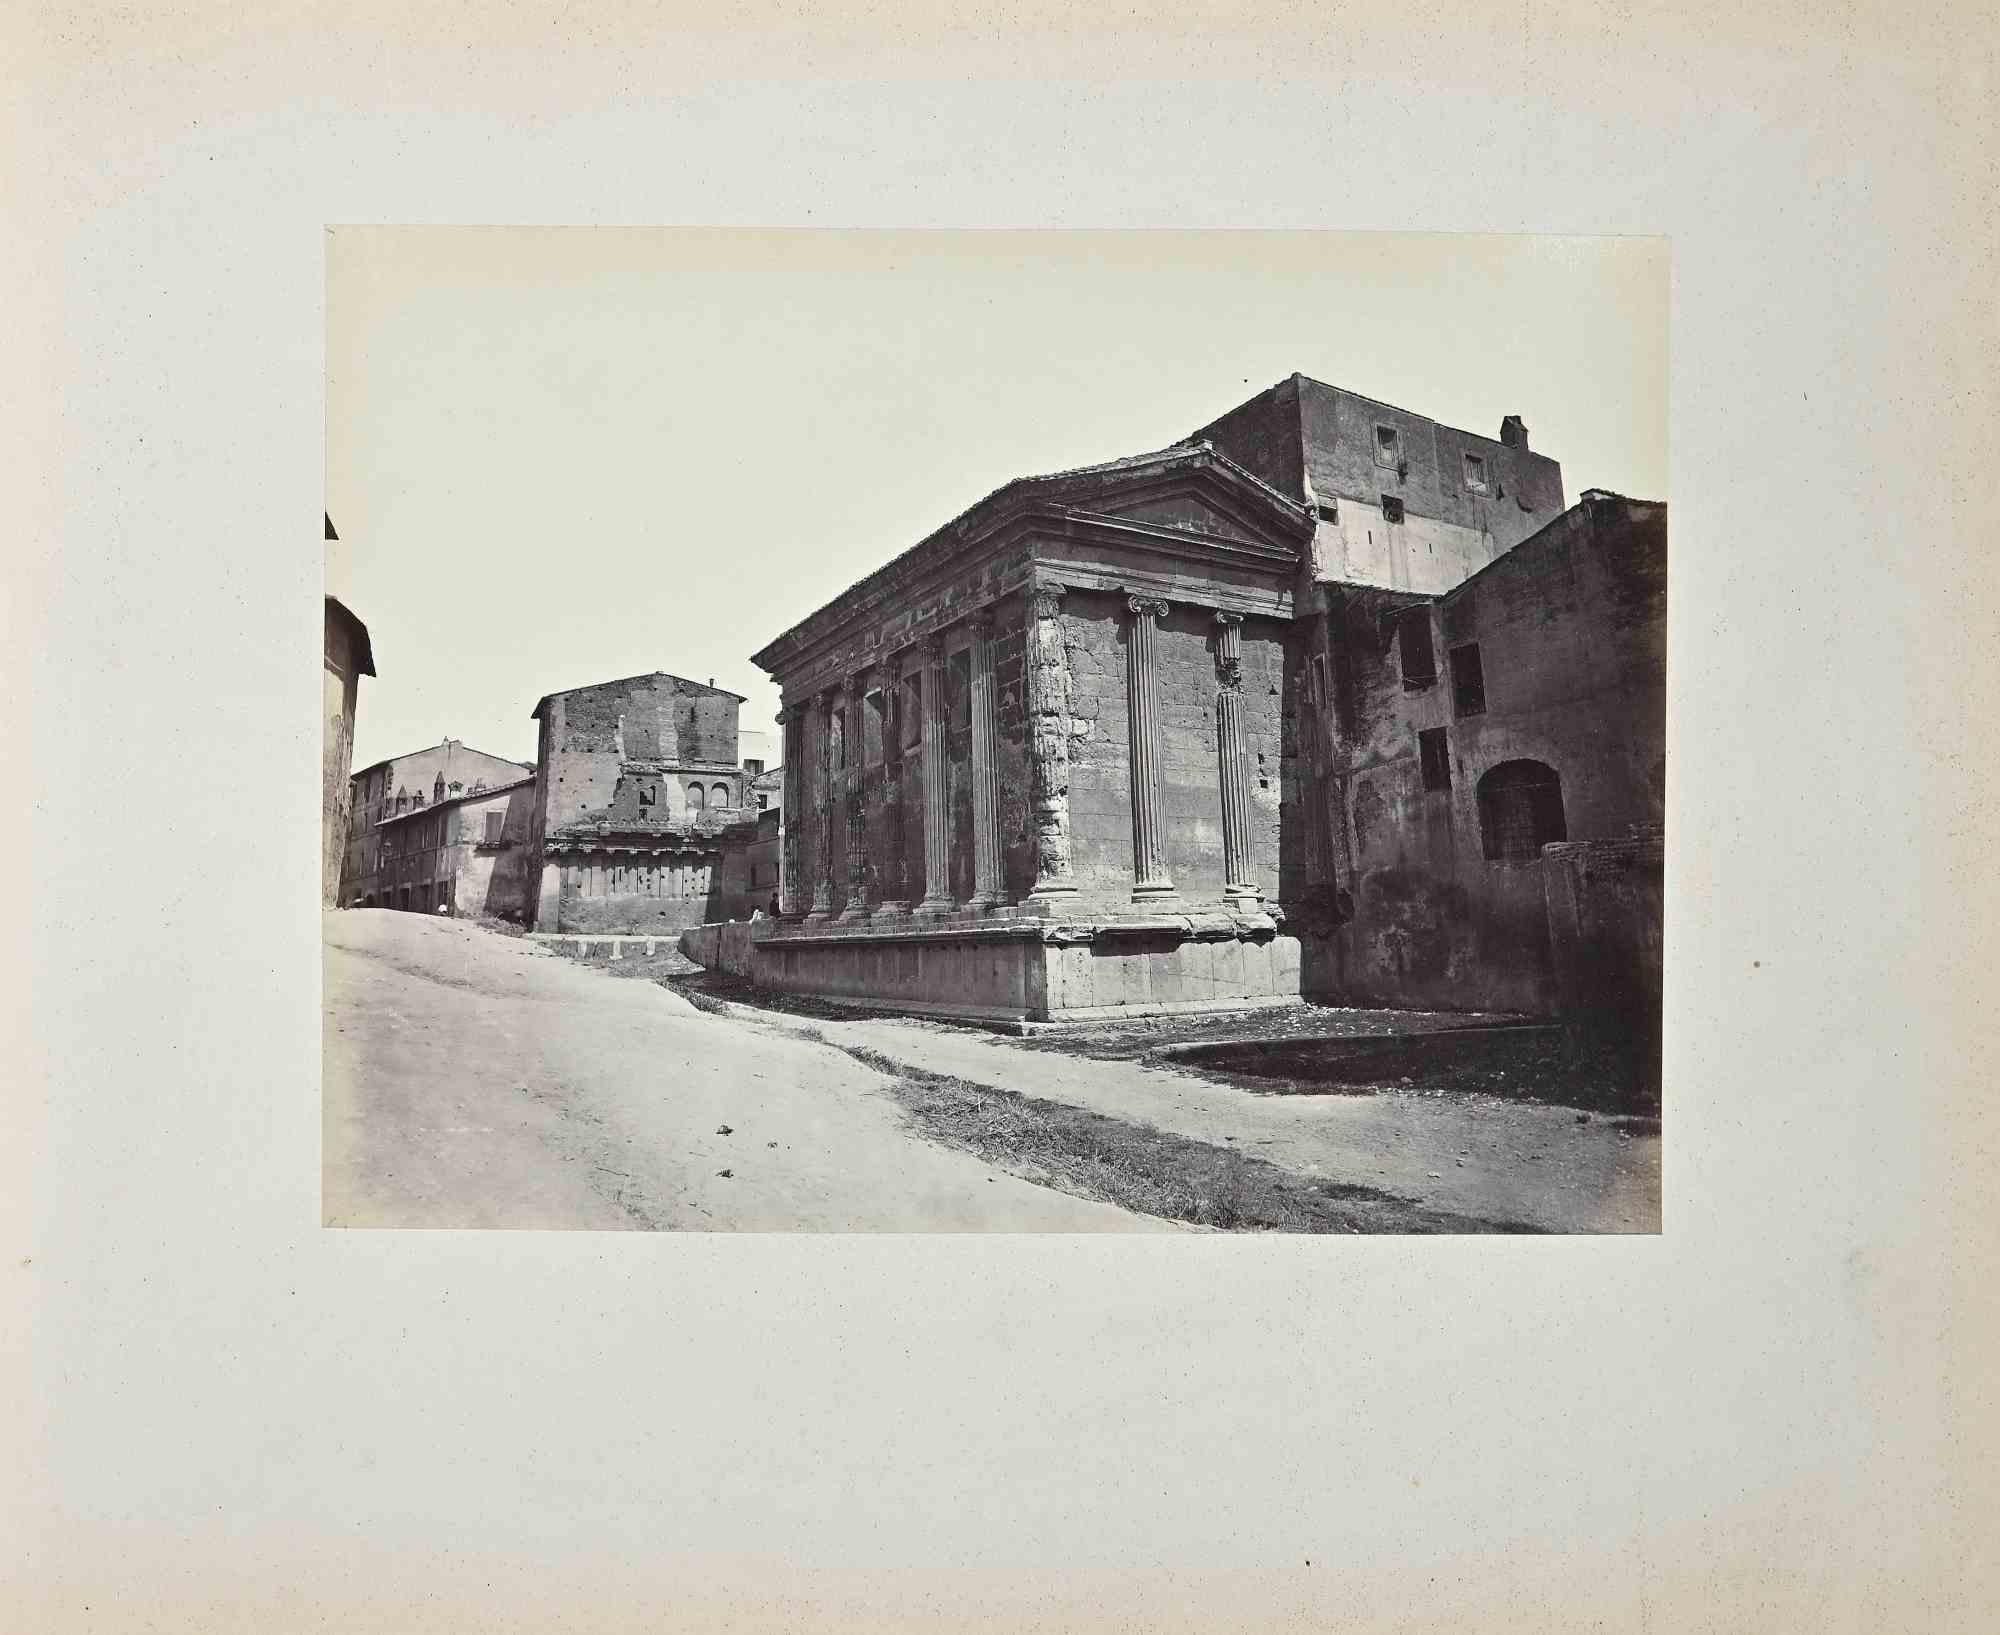 Francesco Sidoli Landscape Photograph - View of Ancient Rome -  Photograph by F. Sidoli - 19th  Century